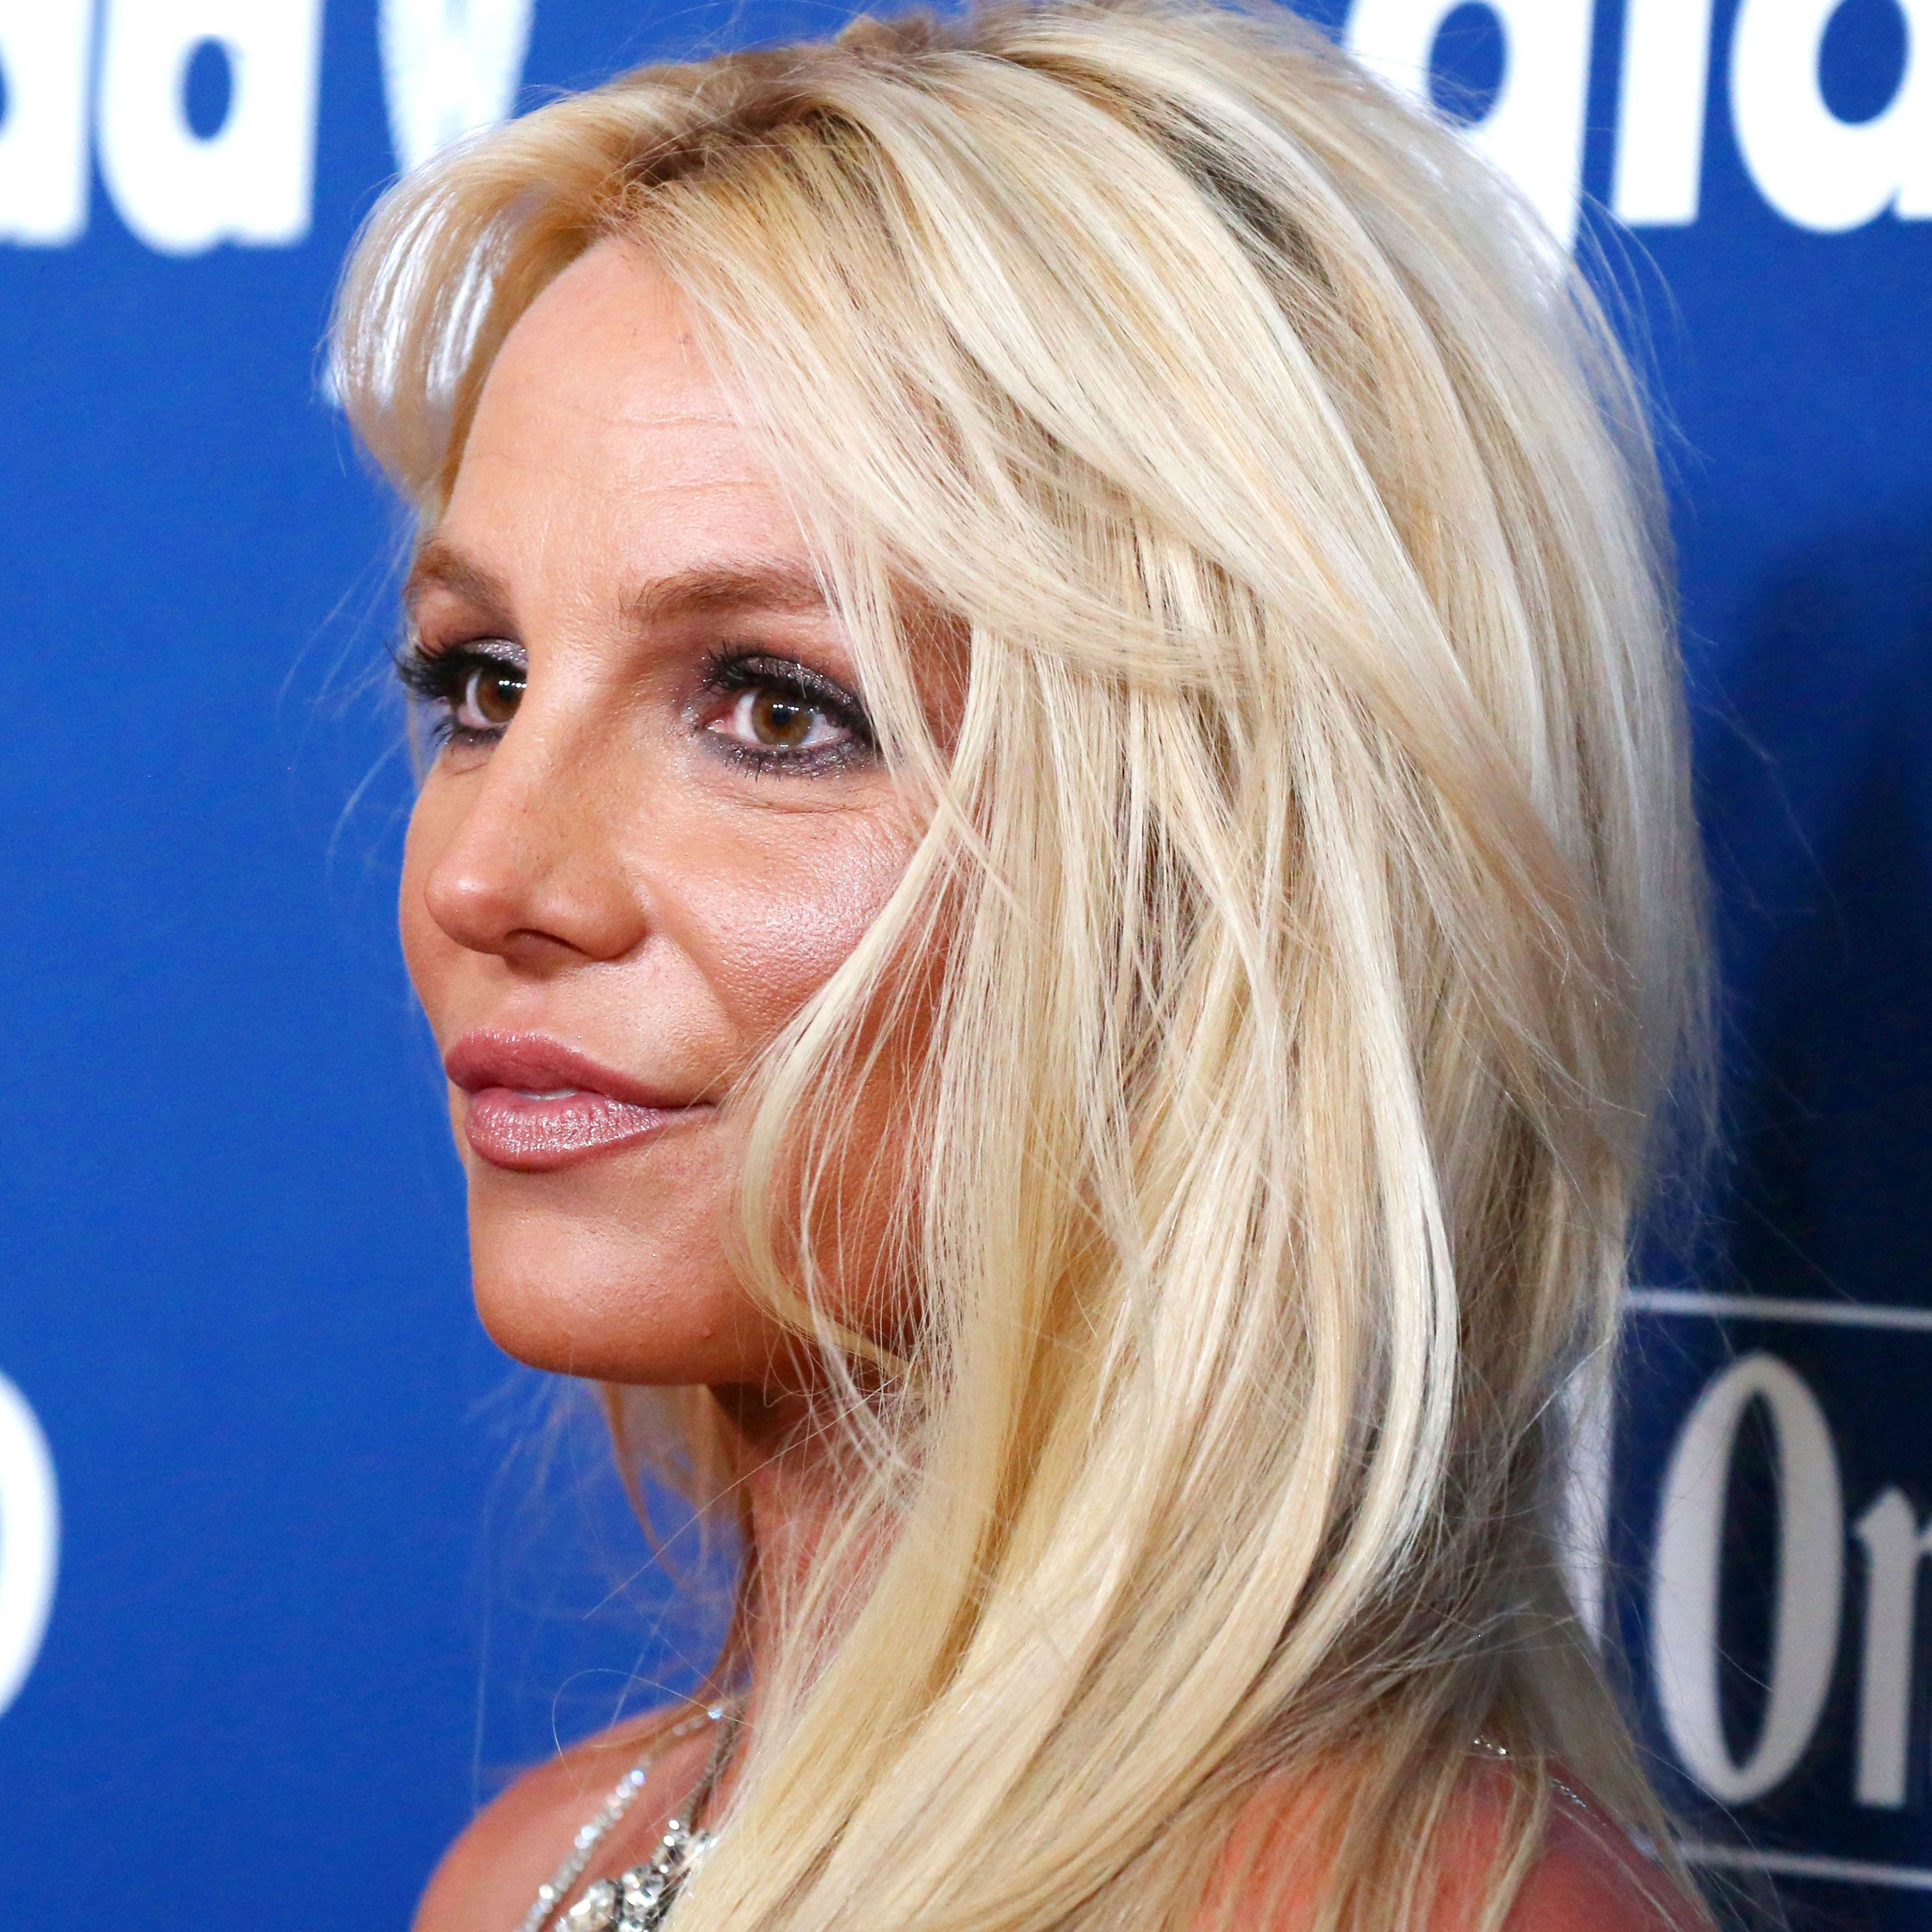 Britney Spears Accuses Dad of Financial Misconduct, Spying